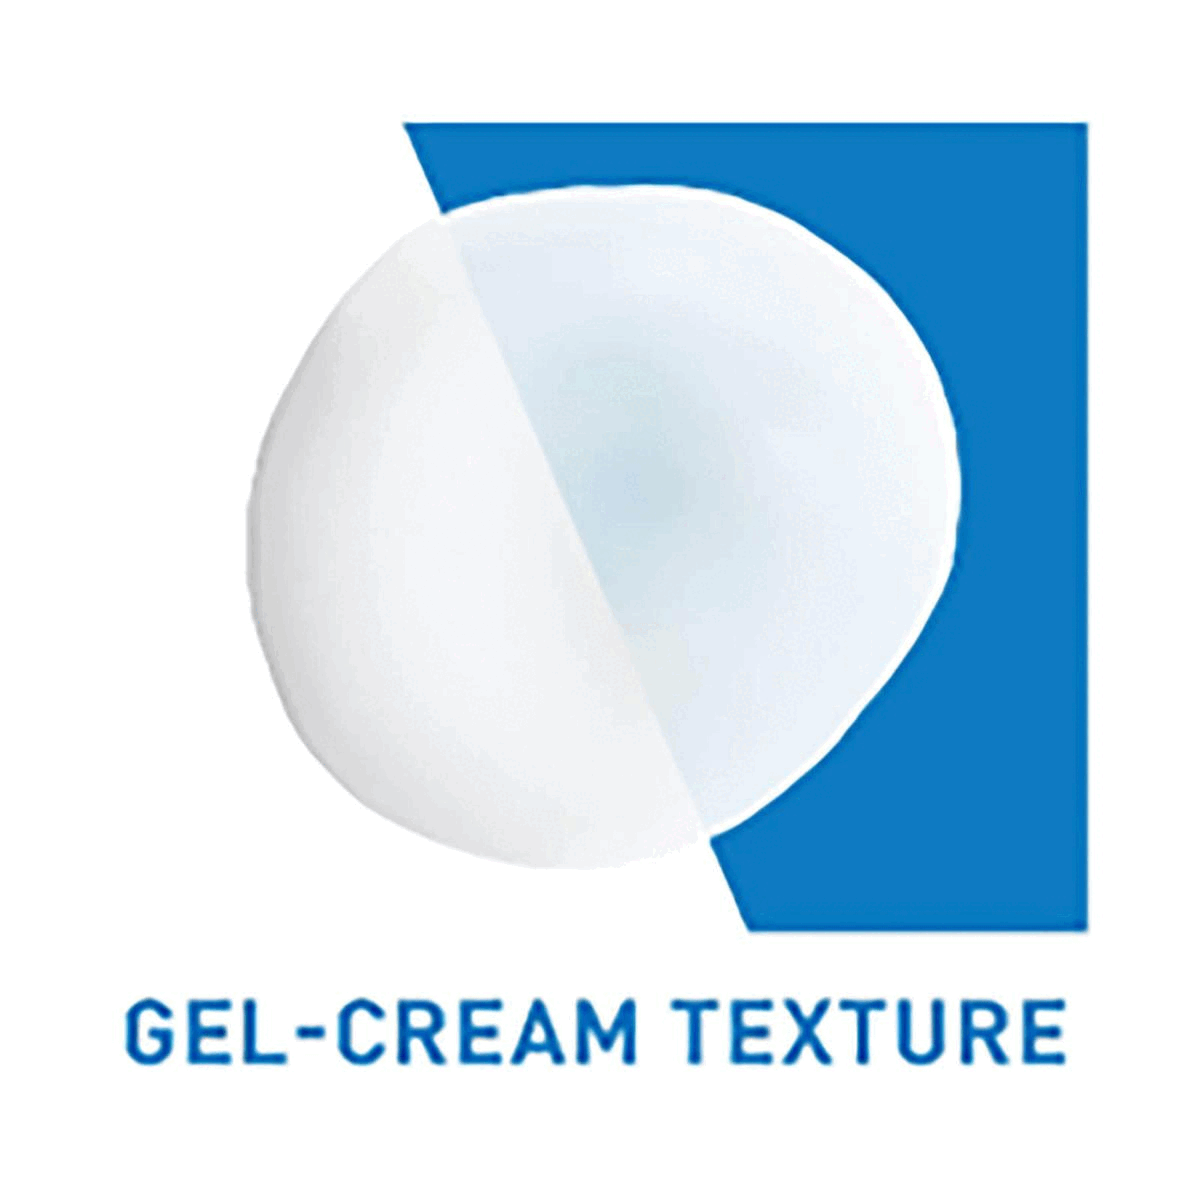 Image 1- gel-cream texture Image 2- soft, smooth skin Image 3- MVE technology, all day hydration 3 essential ceramides, hyaluronic acid